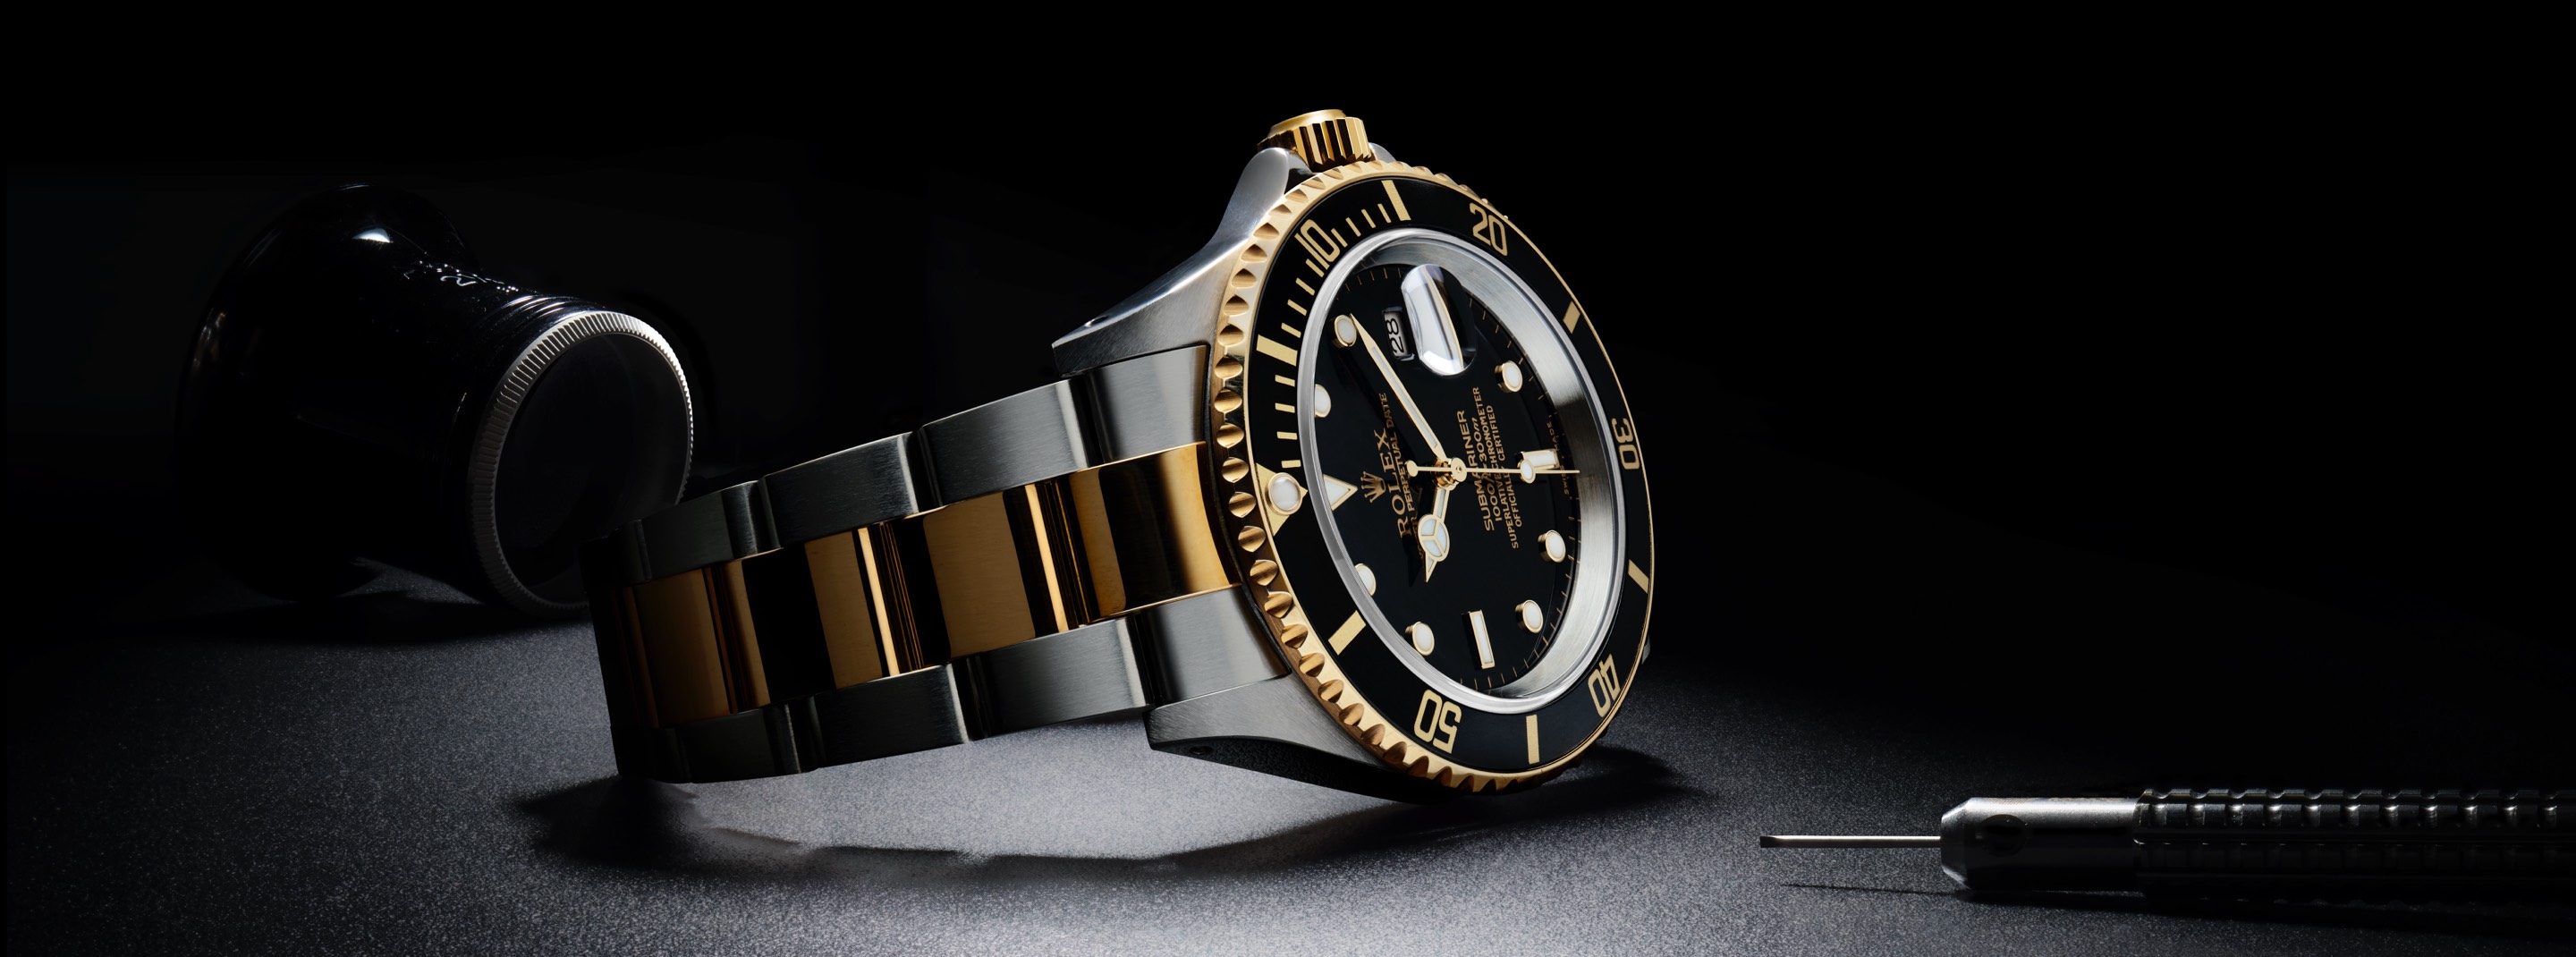 Rolex black and gold watch with link strap